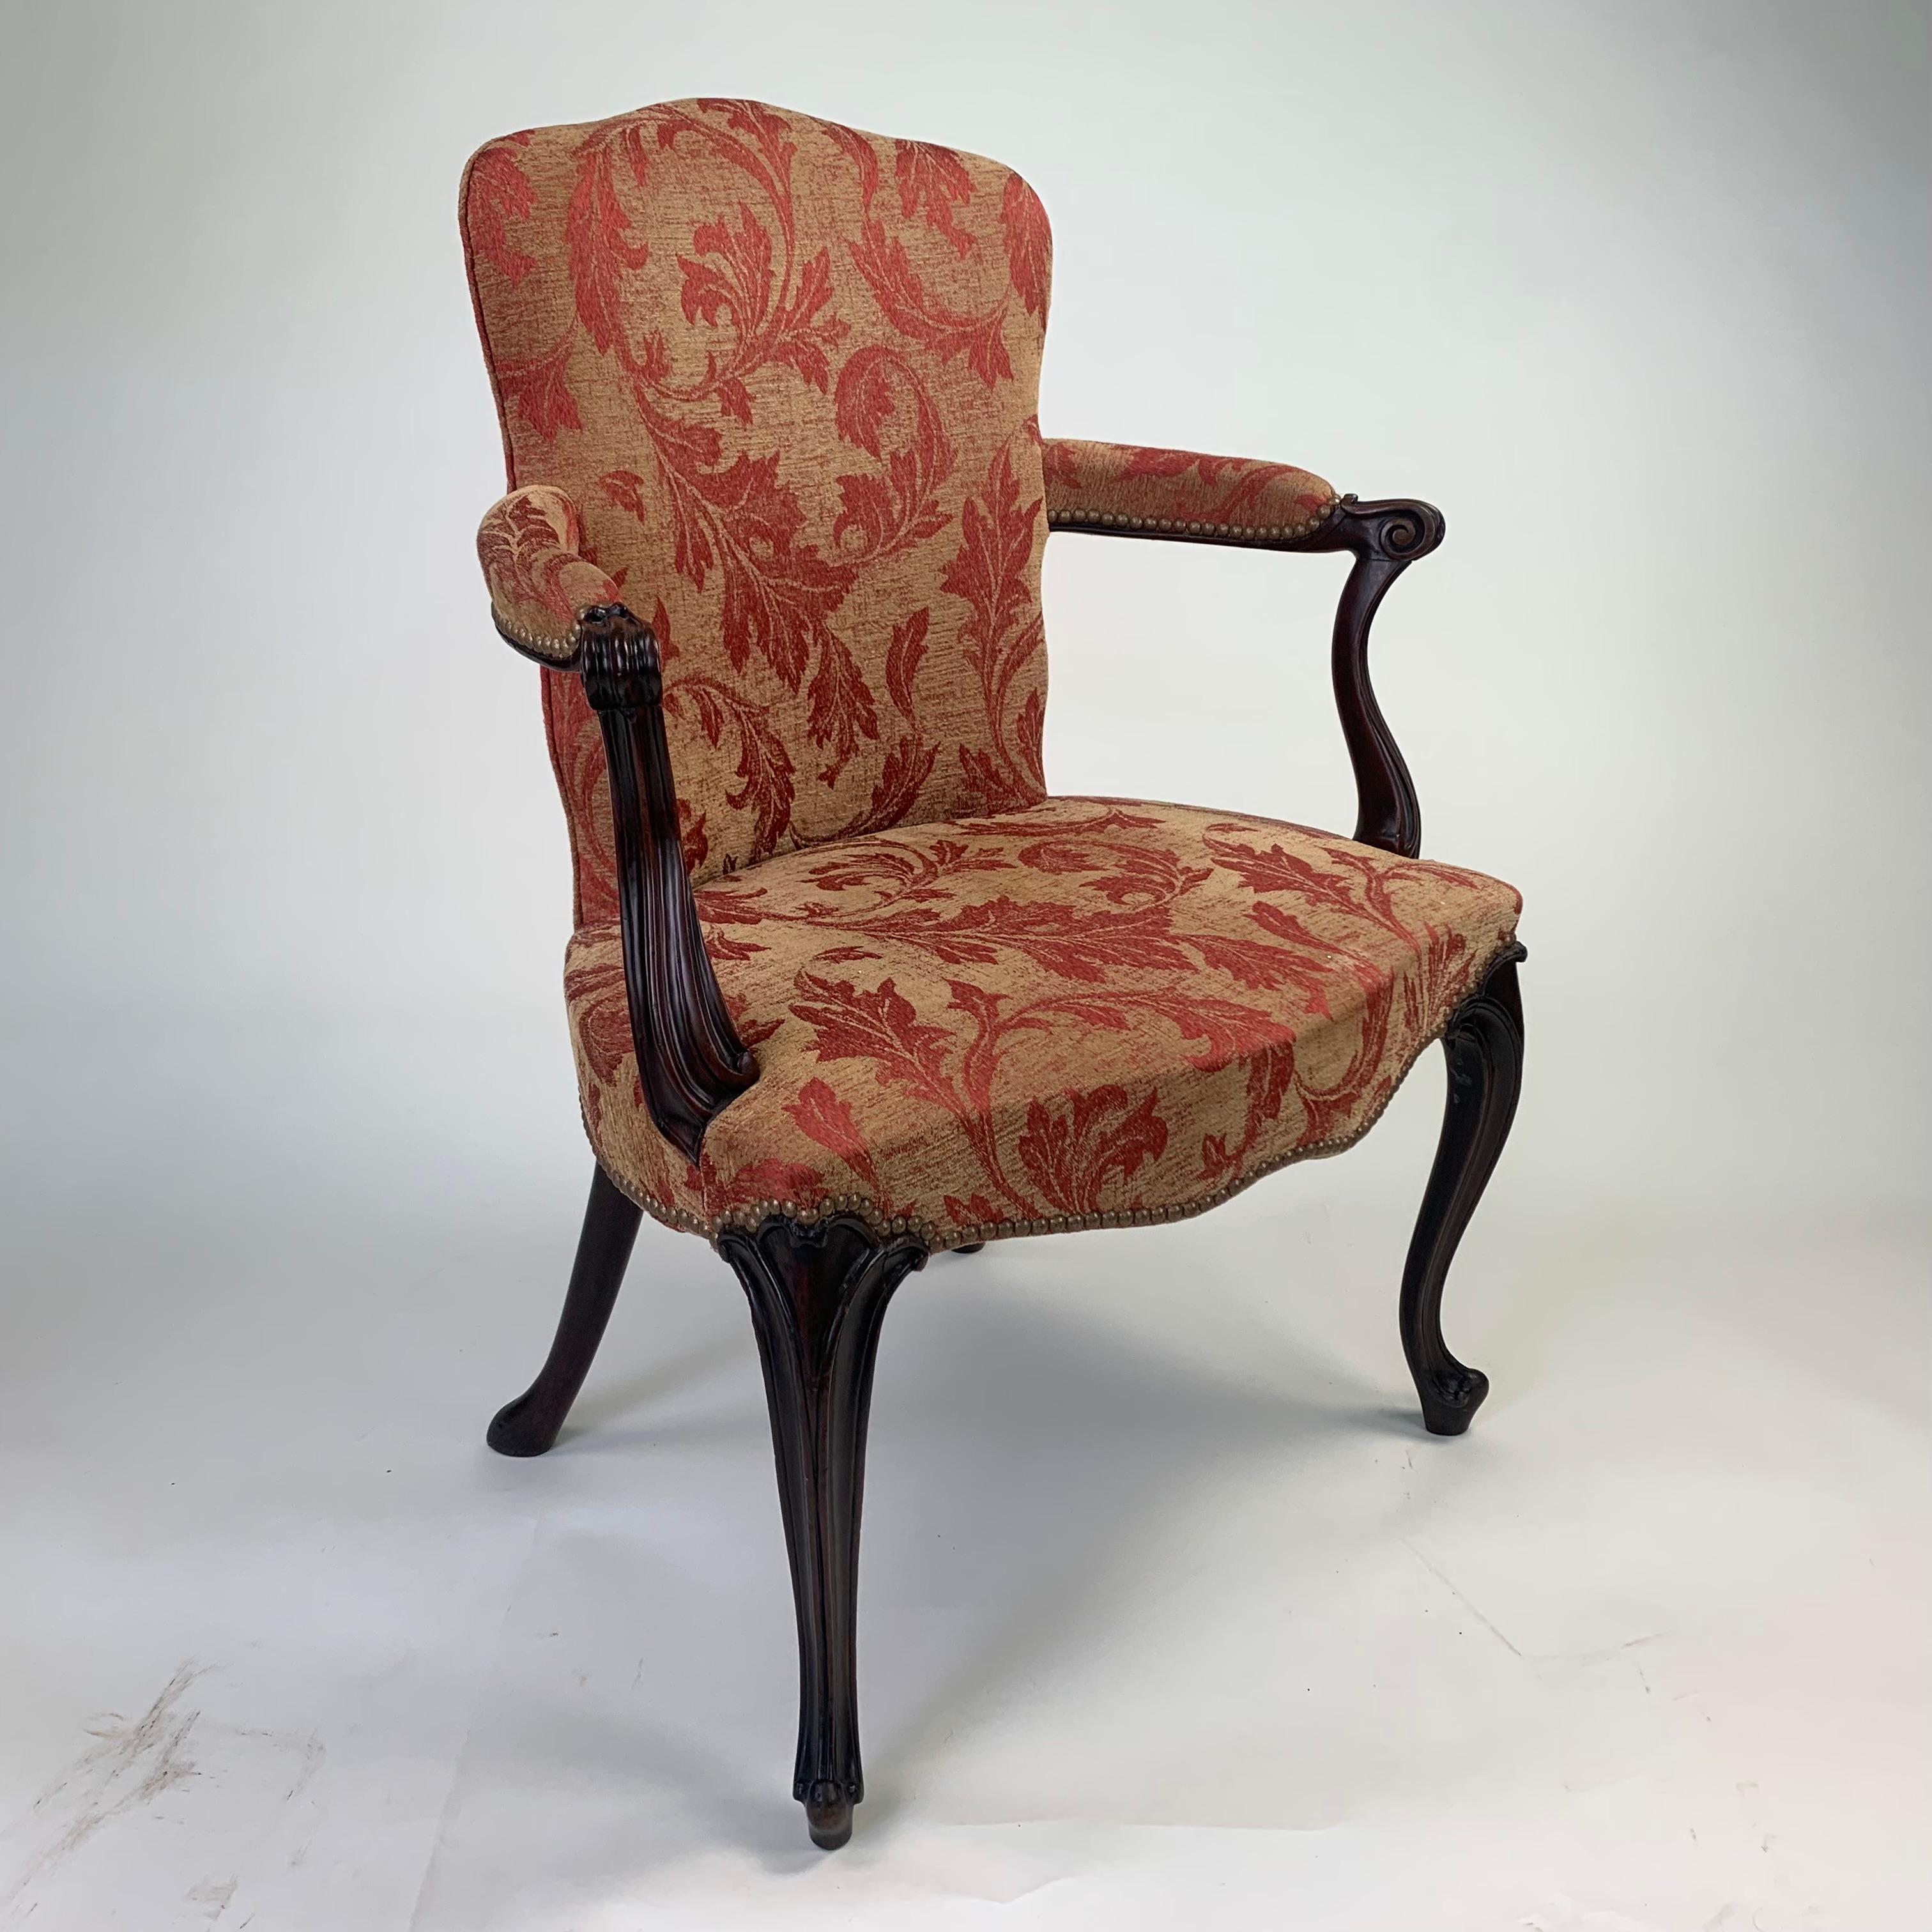 A high quality late 18th century English salon chair of “French Hepplewhite” design, with upholstered back and out-scrolled moulded arms, standing on shaped and moulded cabriole legs and scrolled toes with pad feet at the rear.